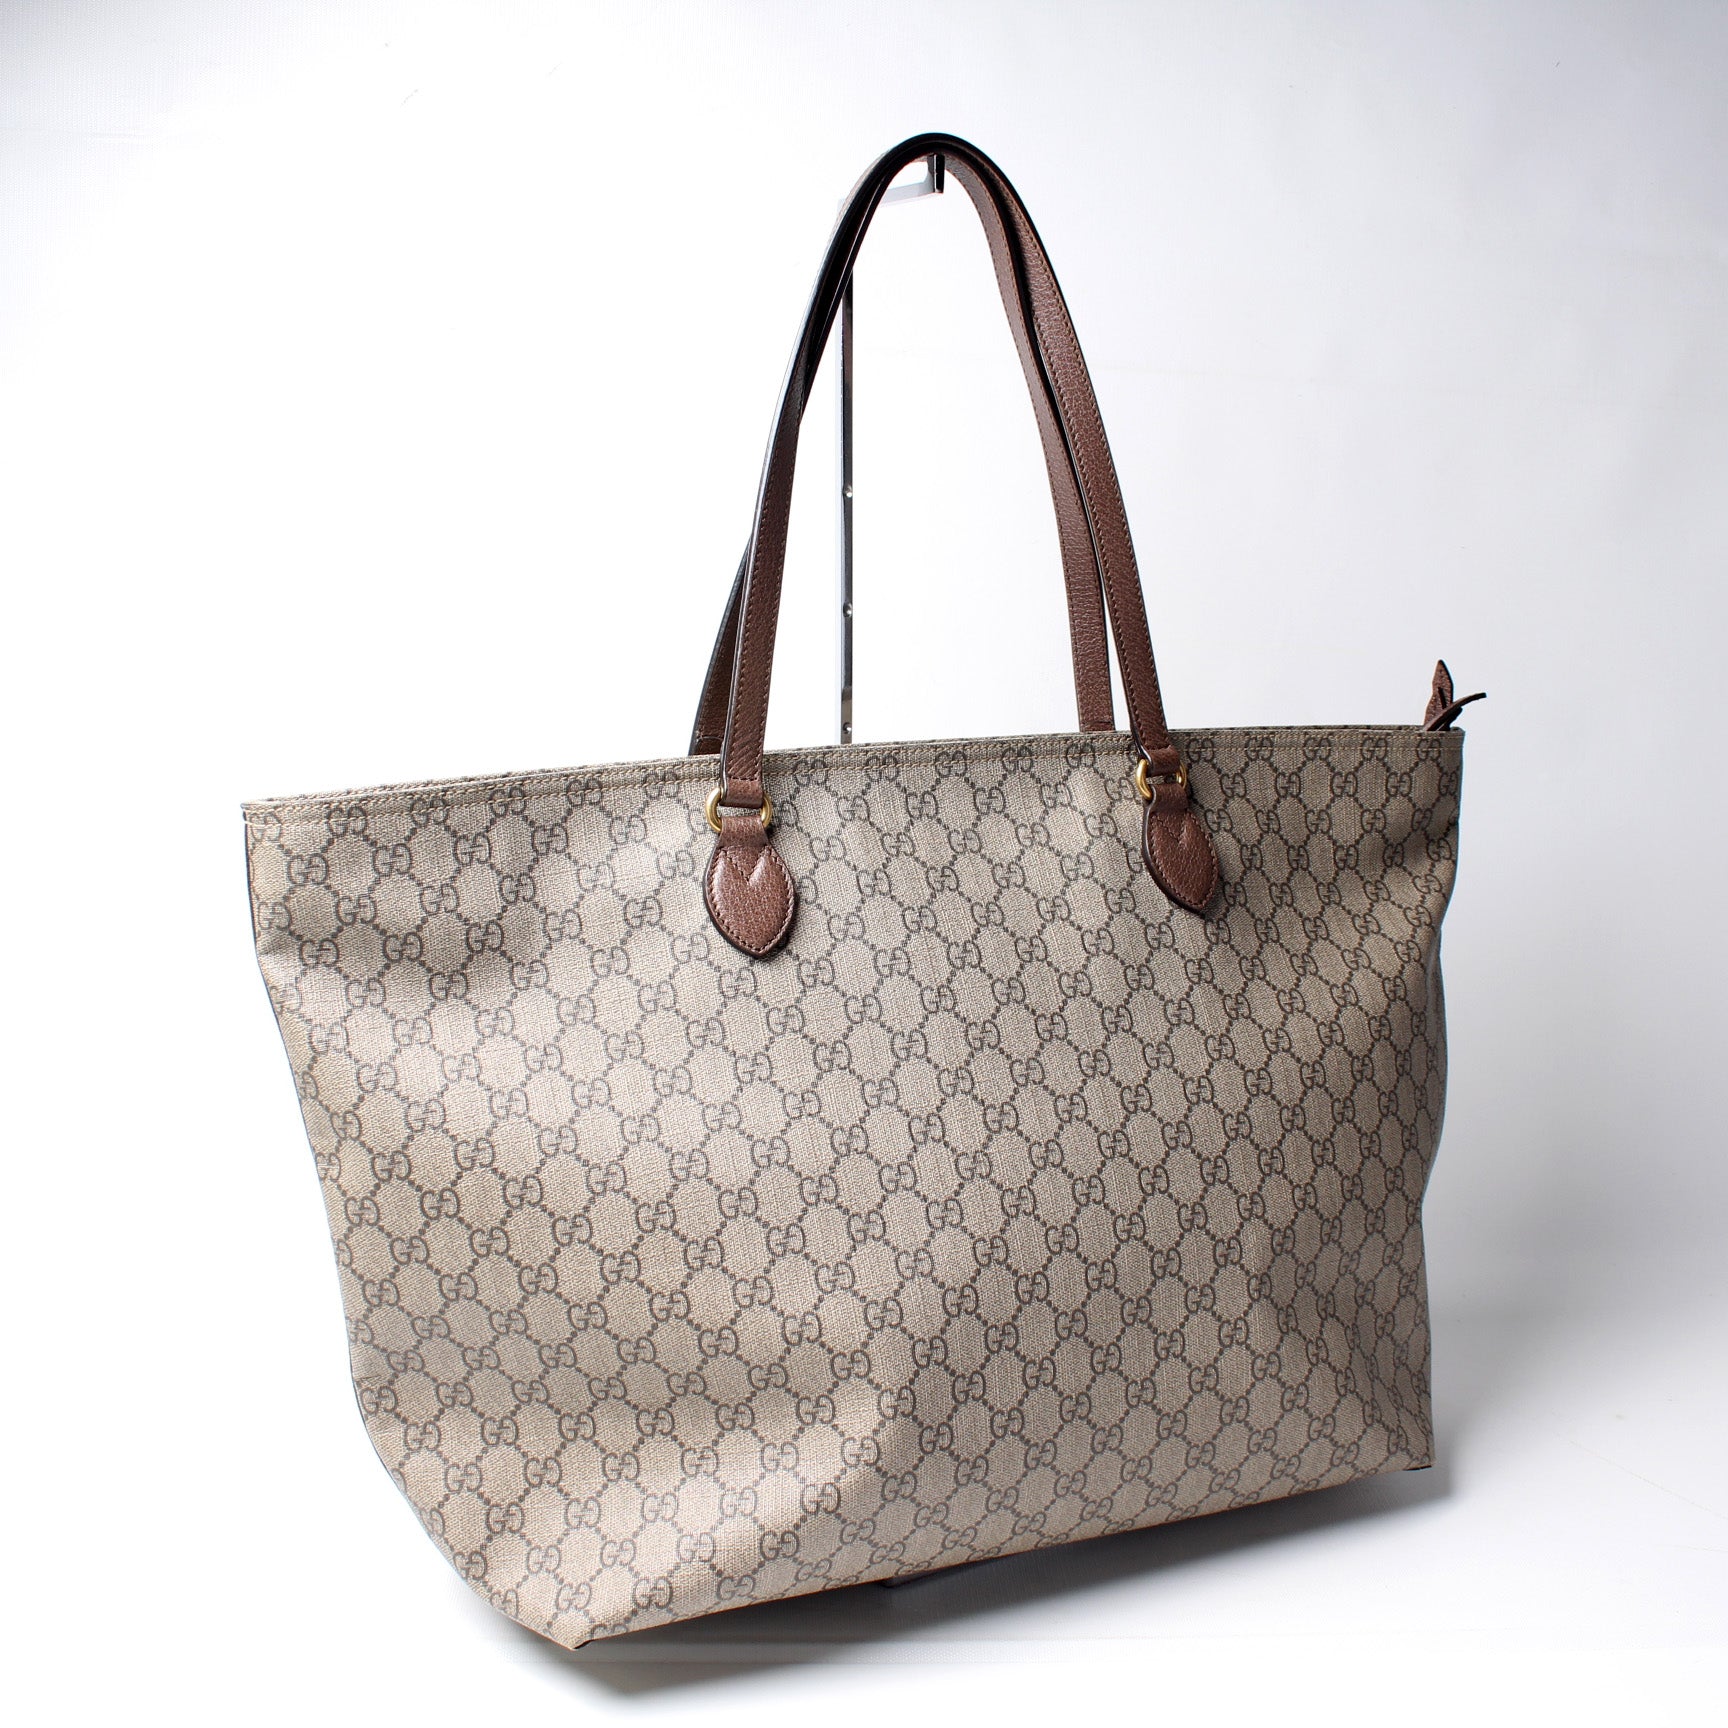 GUCCI Ophidia Large GG Supreme Coated Canvas Tote Bag Beige 547974